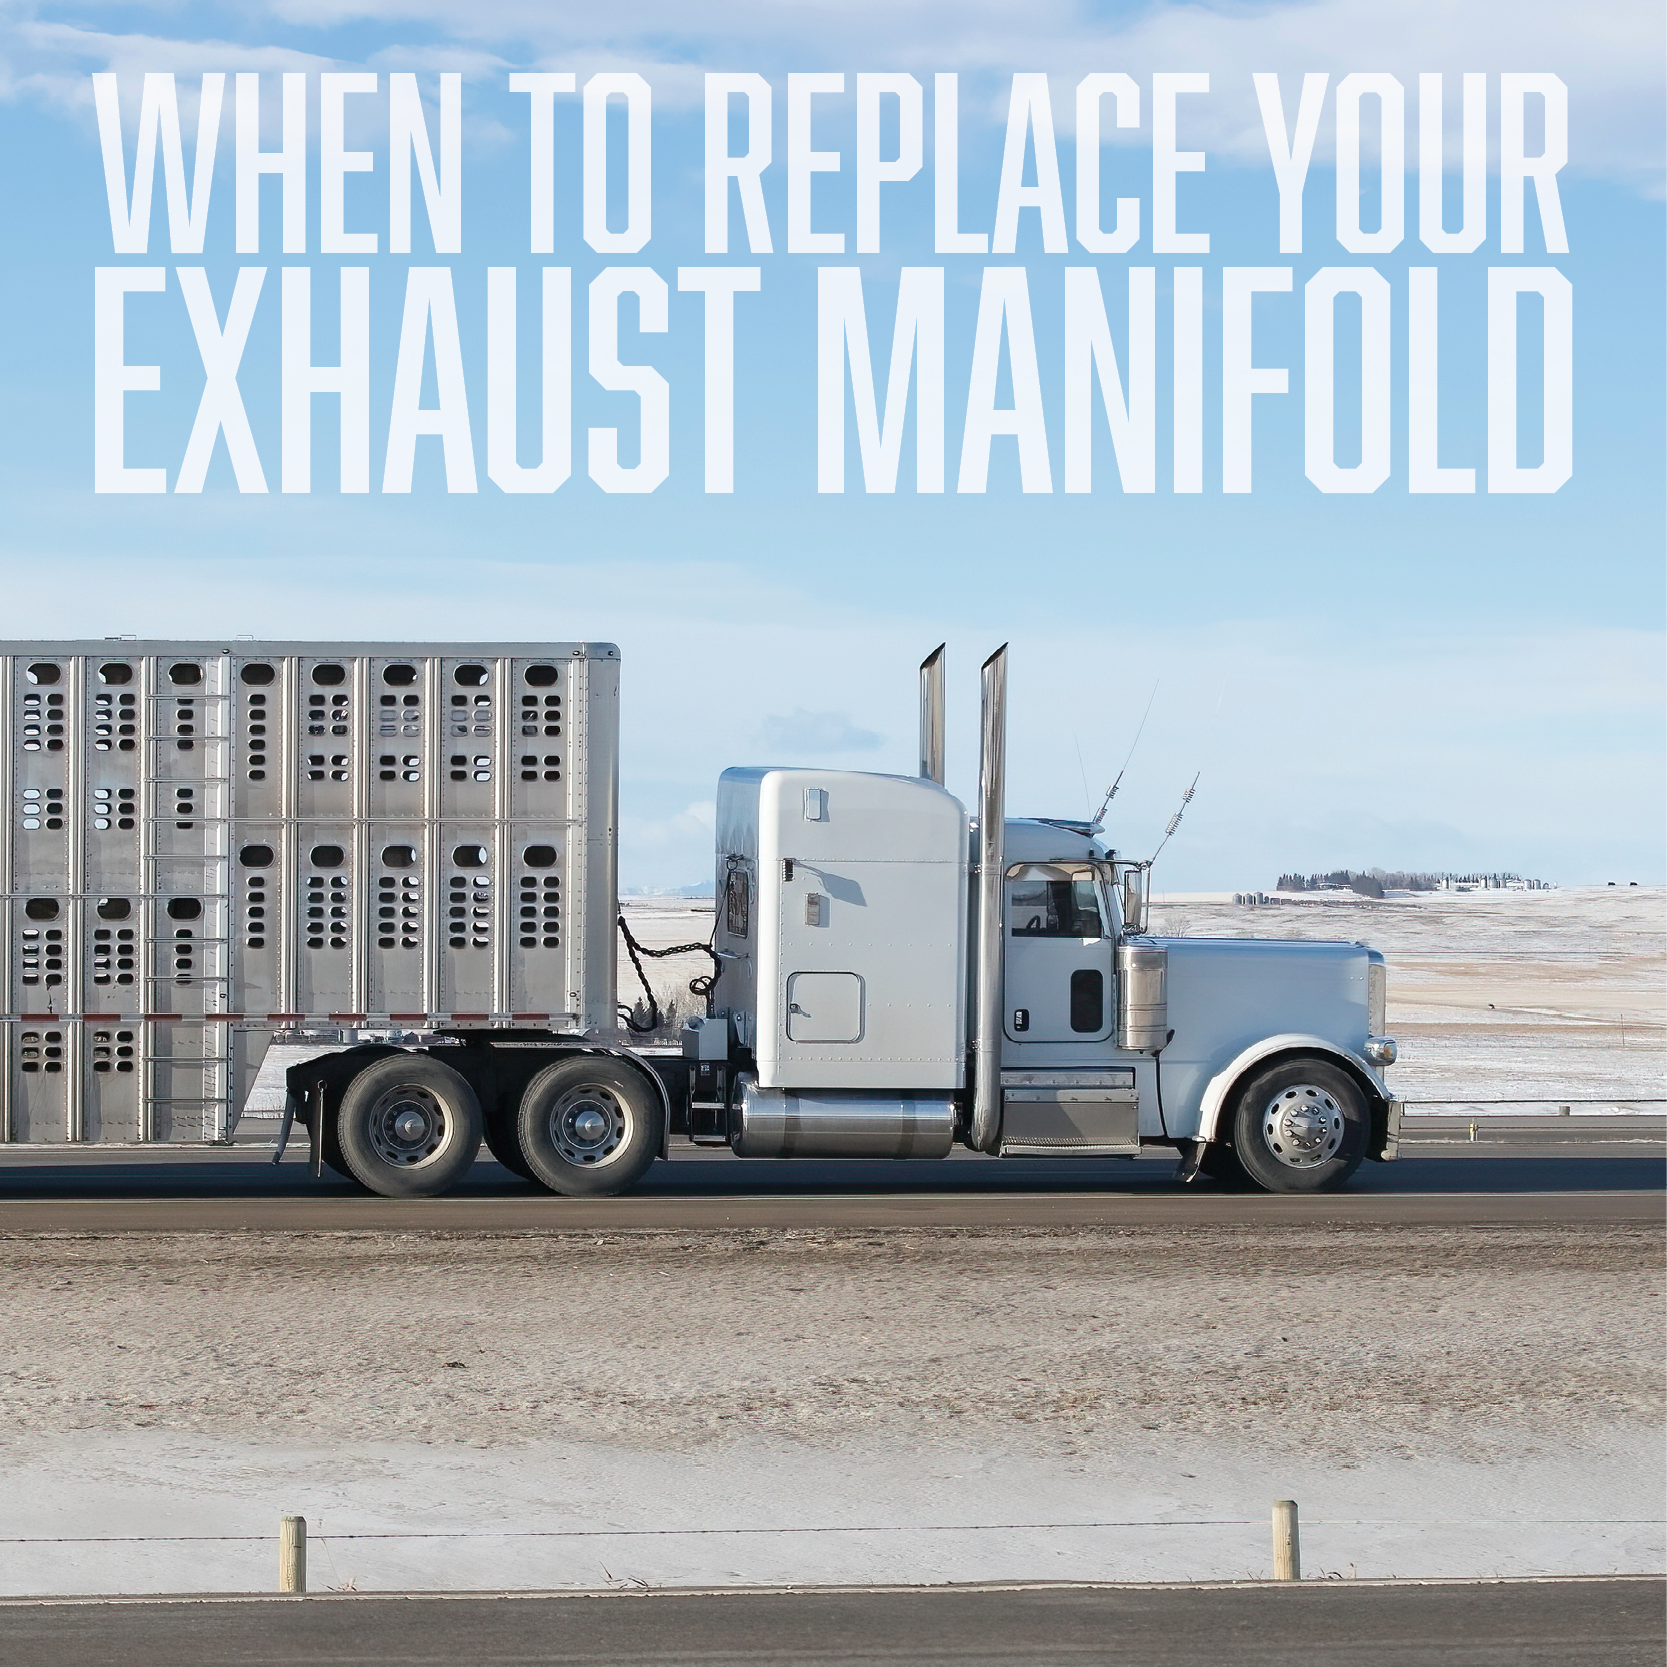 When to Replace Your Exhaust Manifold